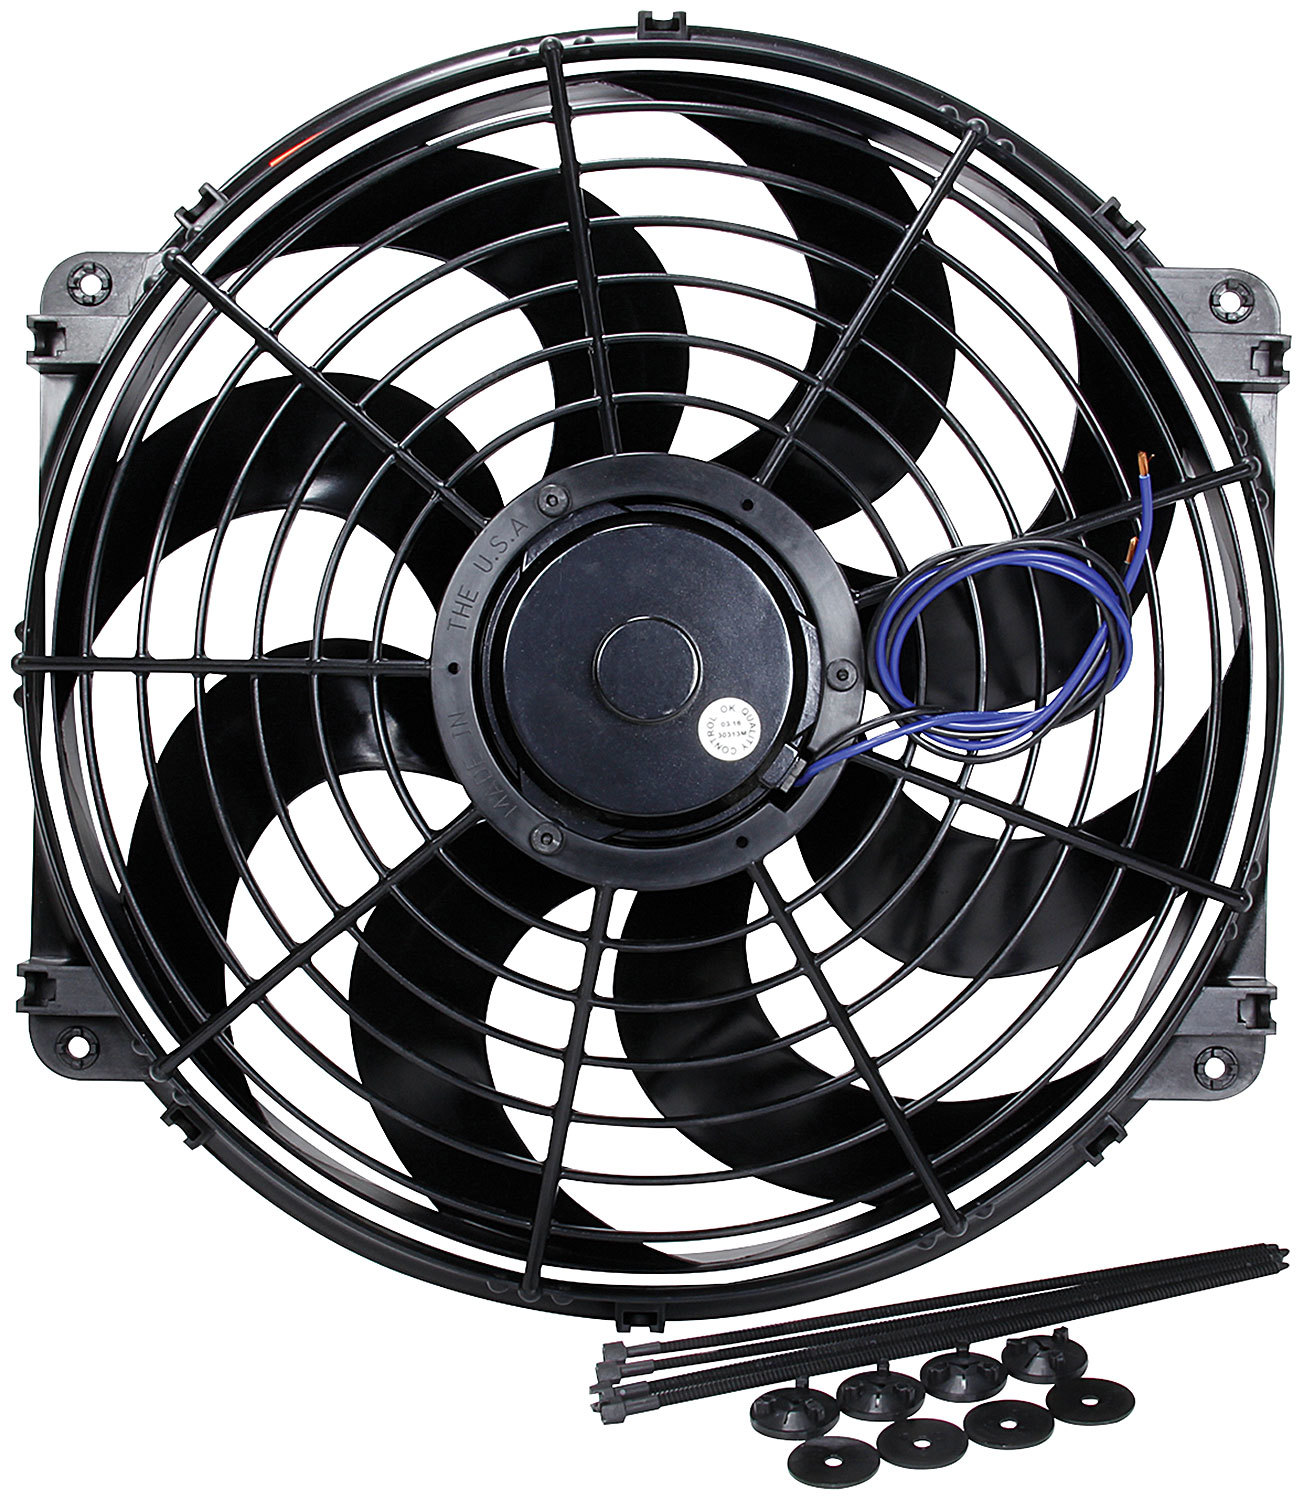 Electric Cooling Fan - 16 in Fan - Push / Pull - 1980 CFM - 12V - Curved Blade - 15-3/4 x 16-3/4 in - 3-3/4 in Thick - Plastic - Kit